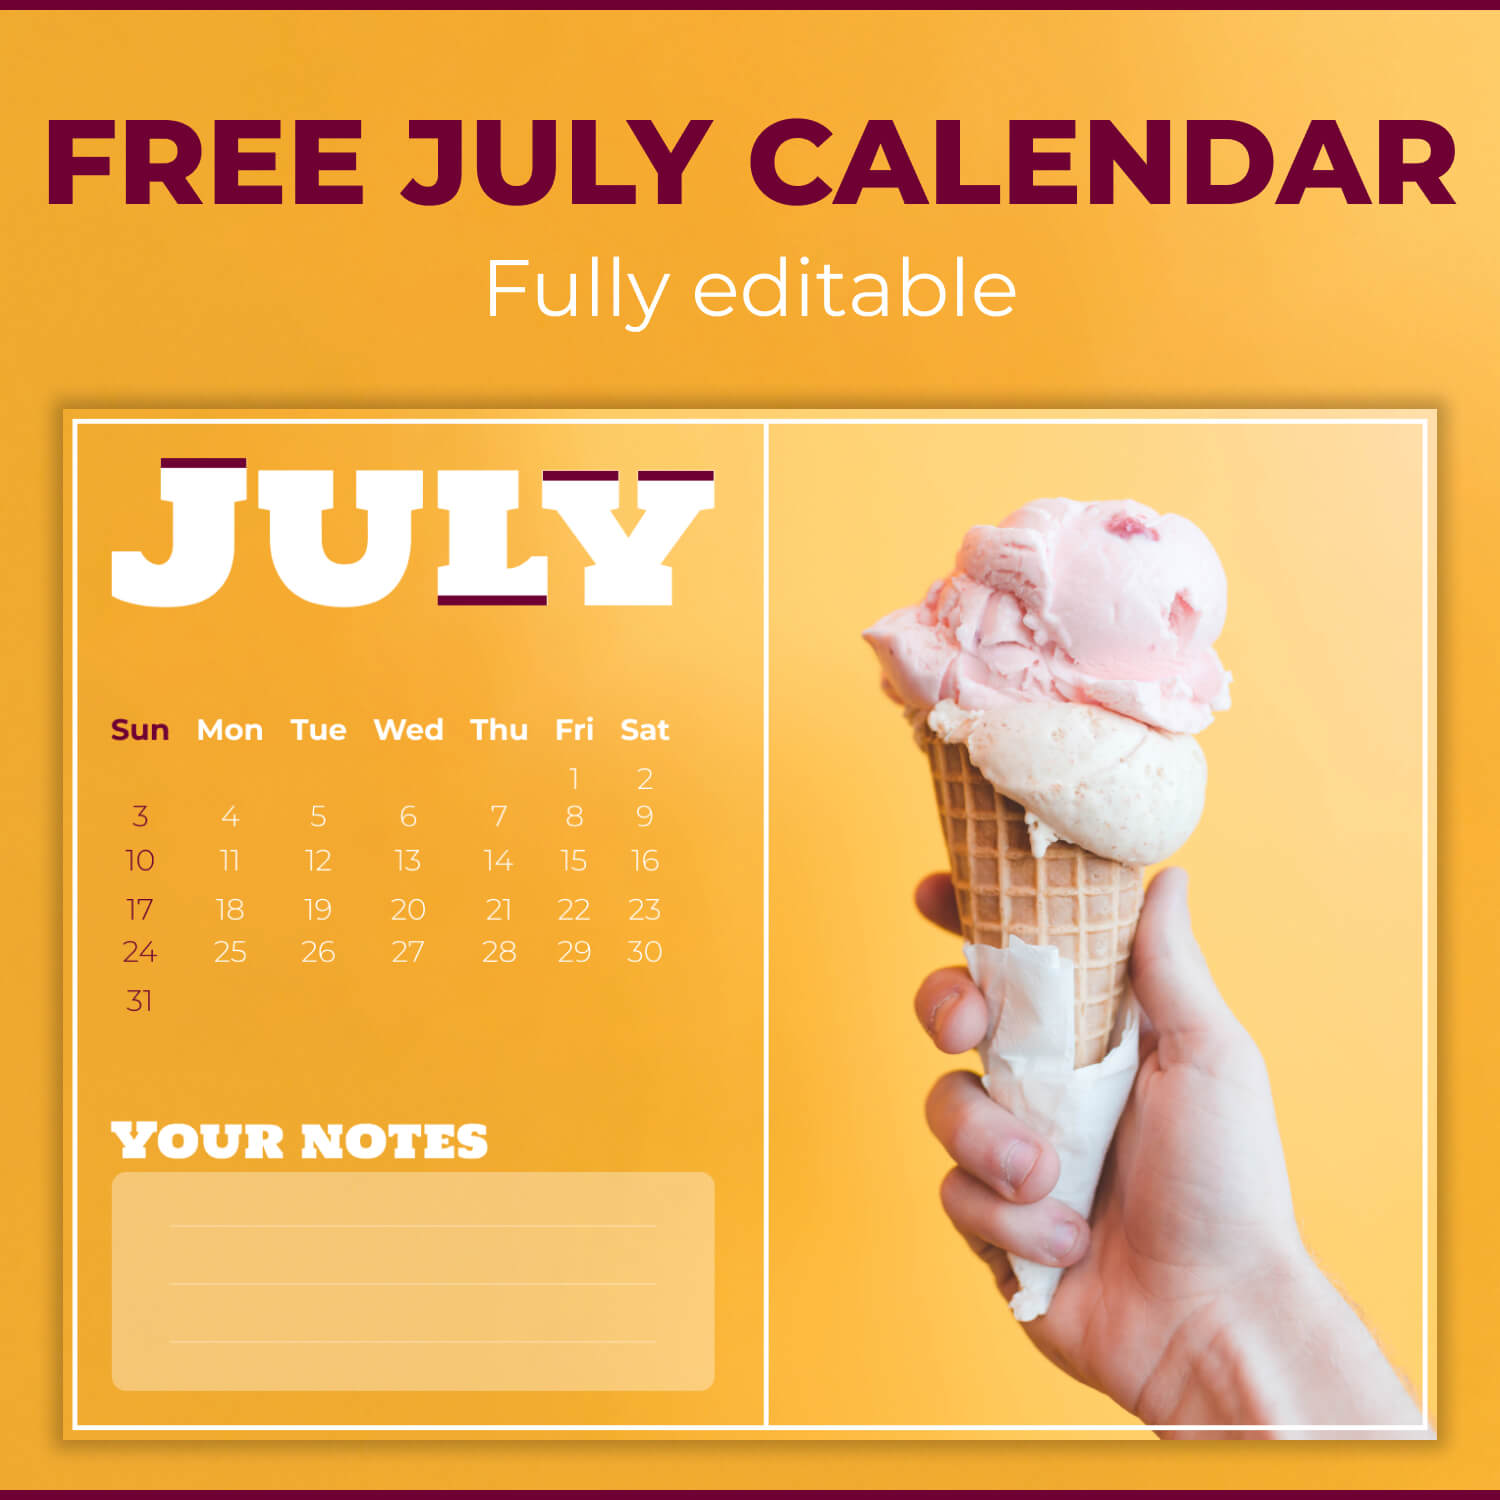 Free Blank July Calendar cover image.